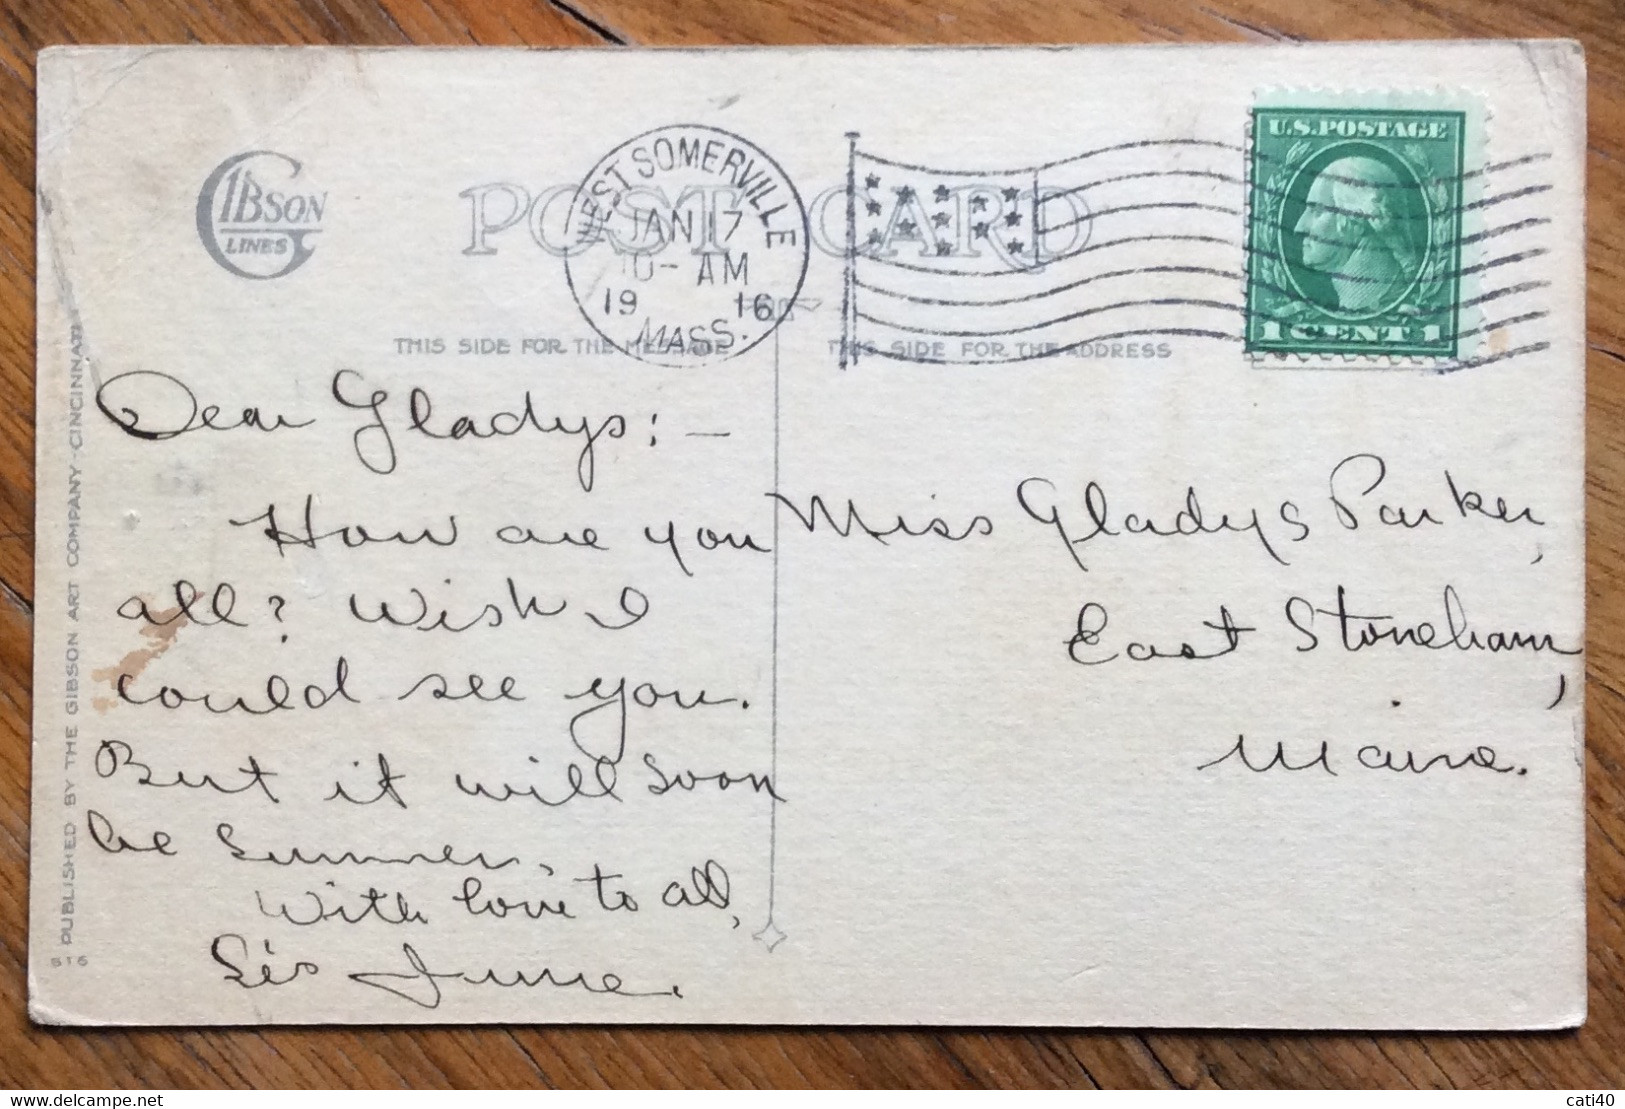 USA - WEST SOMERVILLE,MASS. JAN 17 1916 - VINTAGE POST CARD GREETING , CHRISTMAS , EASTER, PRINT RELIEF, FLOWERS,ECC. - Cape Cod